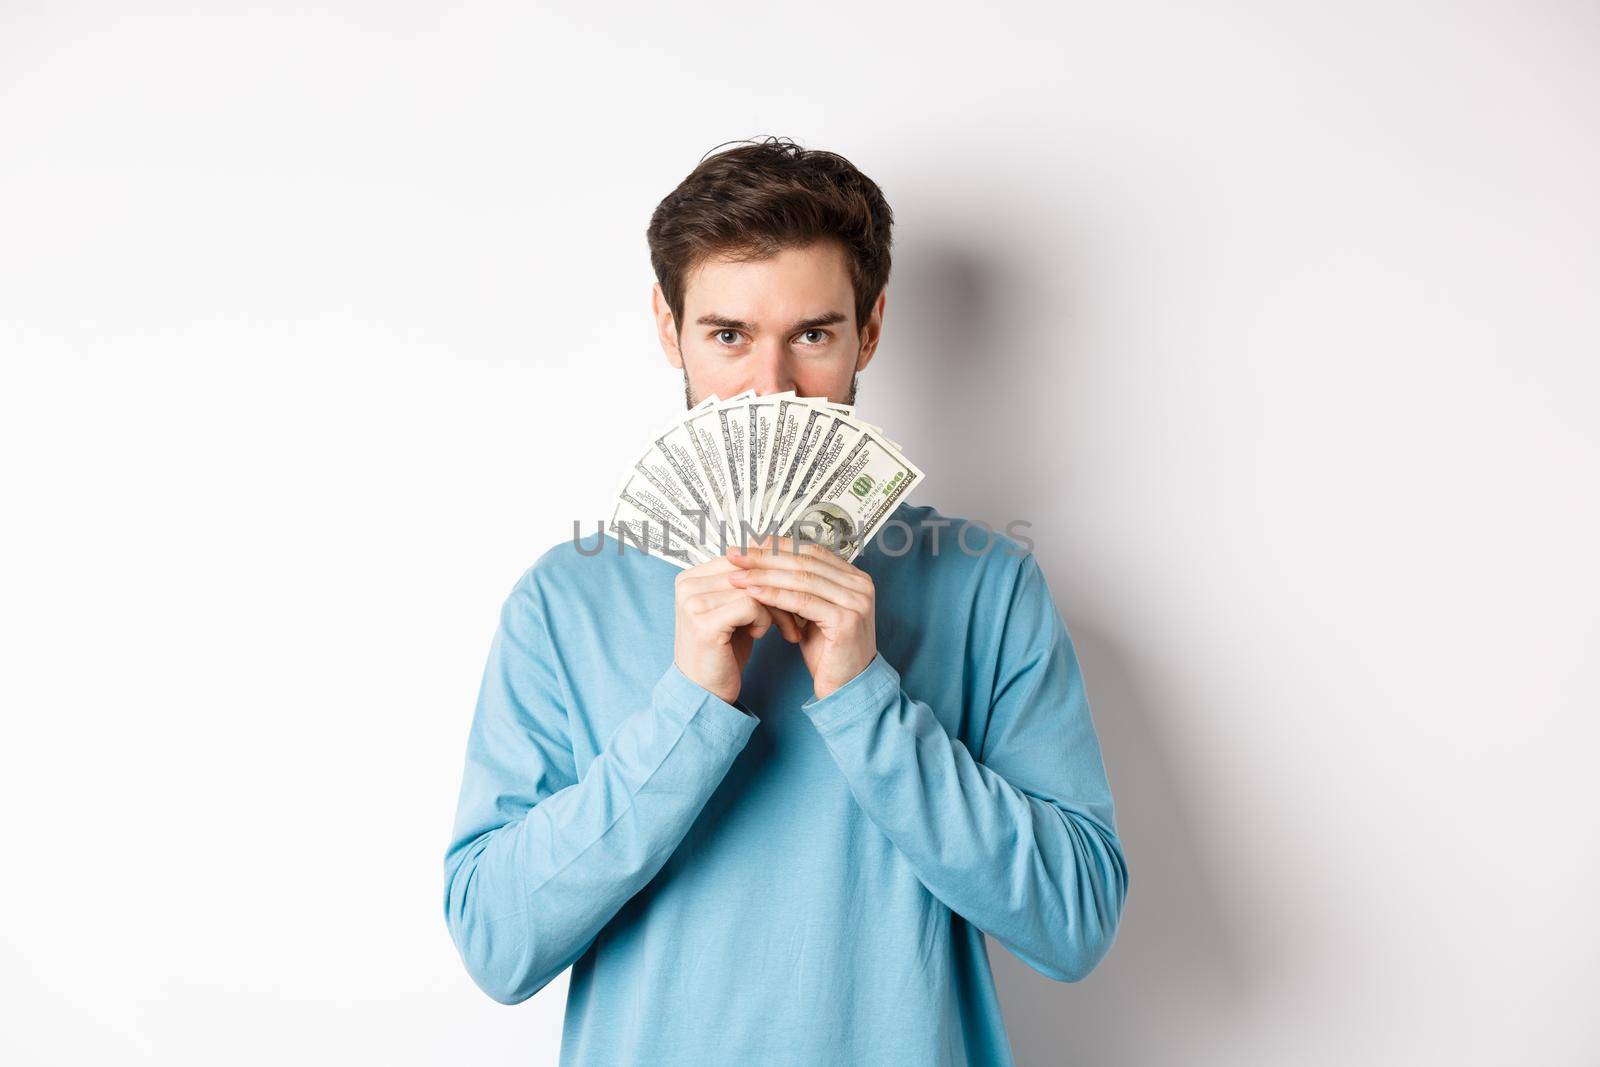 Finance concept. Smiling young man covering face behind money, showing dollars and looking happy, standing over white background.